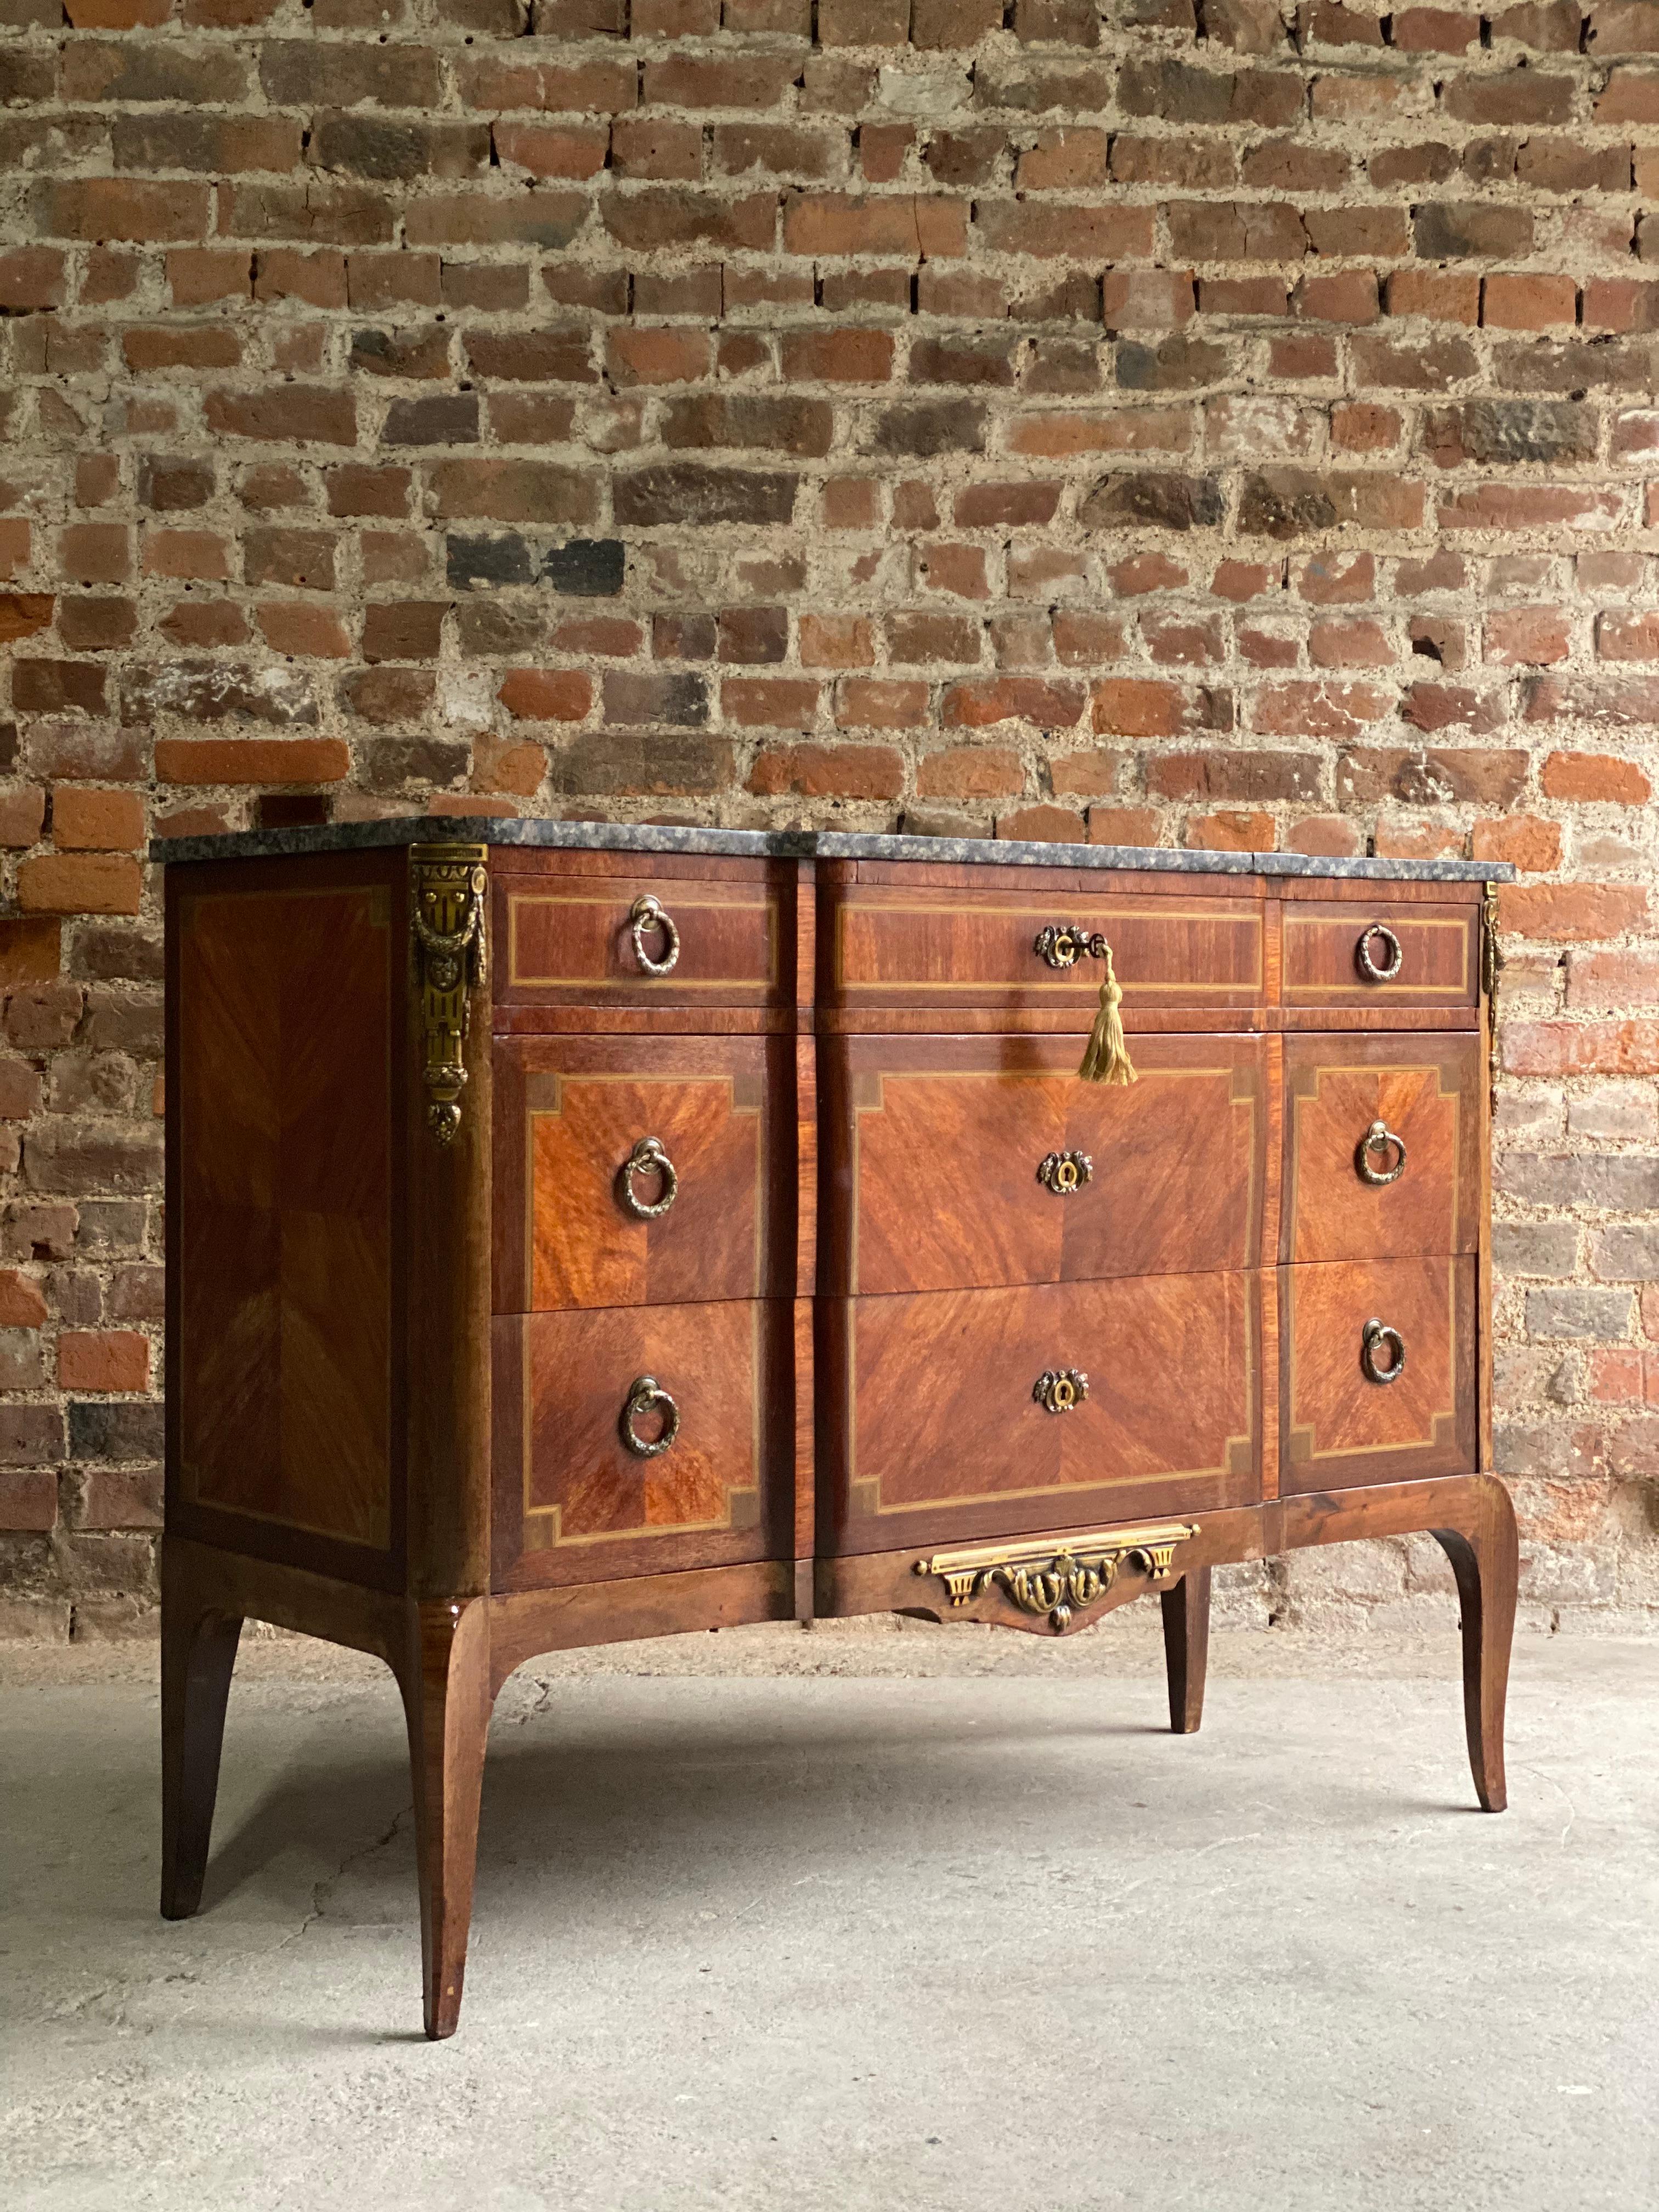 Antique Louis XV style marble topped mahogany breakfront commode chest of drawers, circa 1890, late 19th century French Parisian Napoleon III period, the black variegated shaped marble over three graduated drawers with brass drop ring pulls with